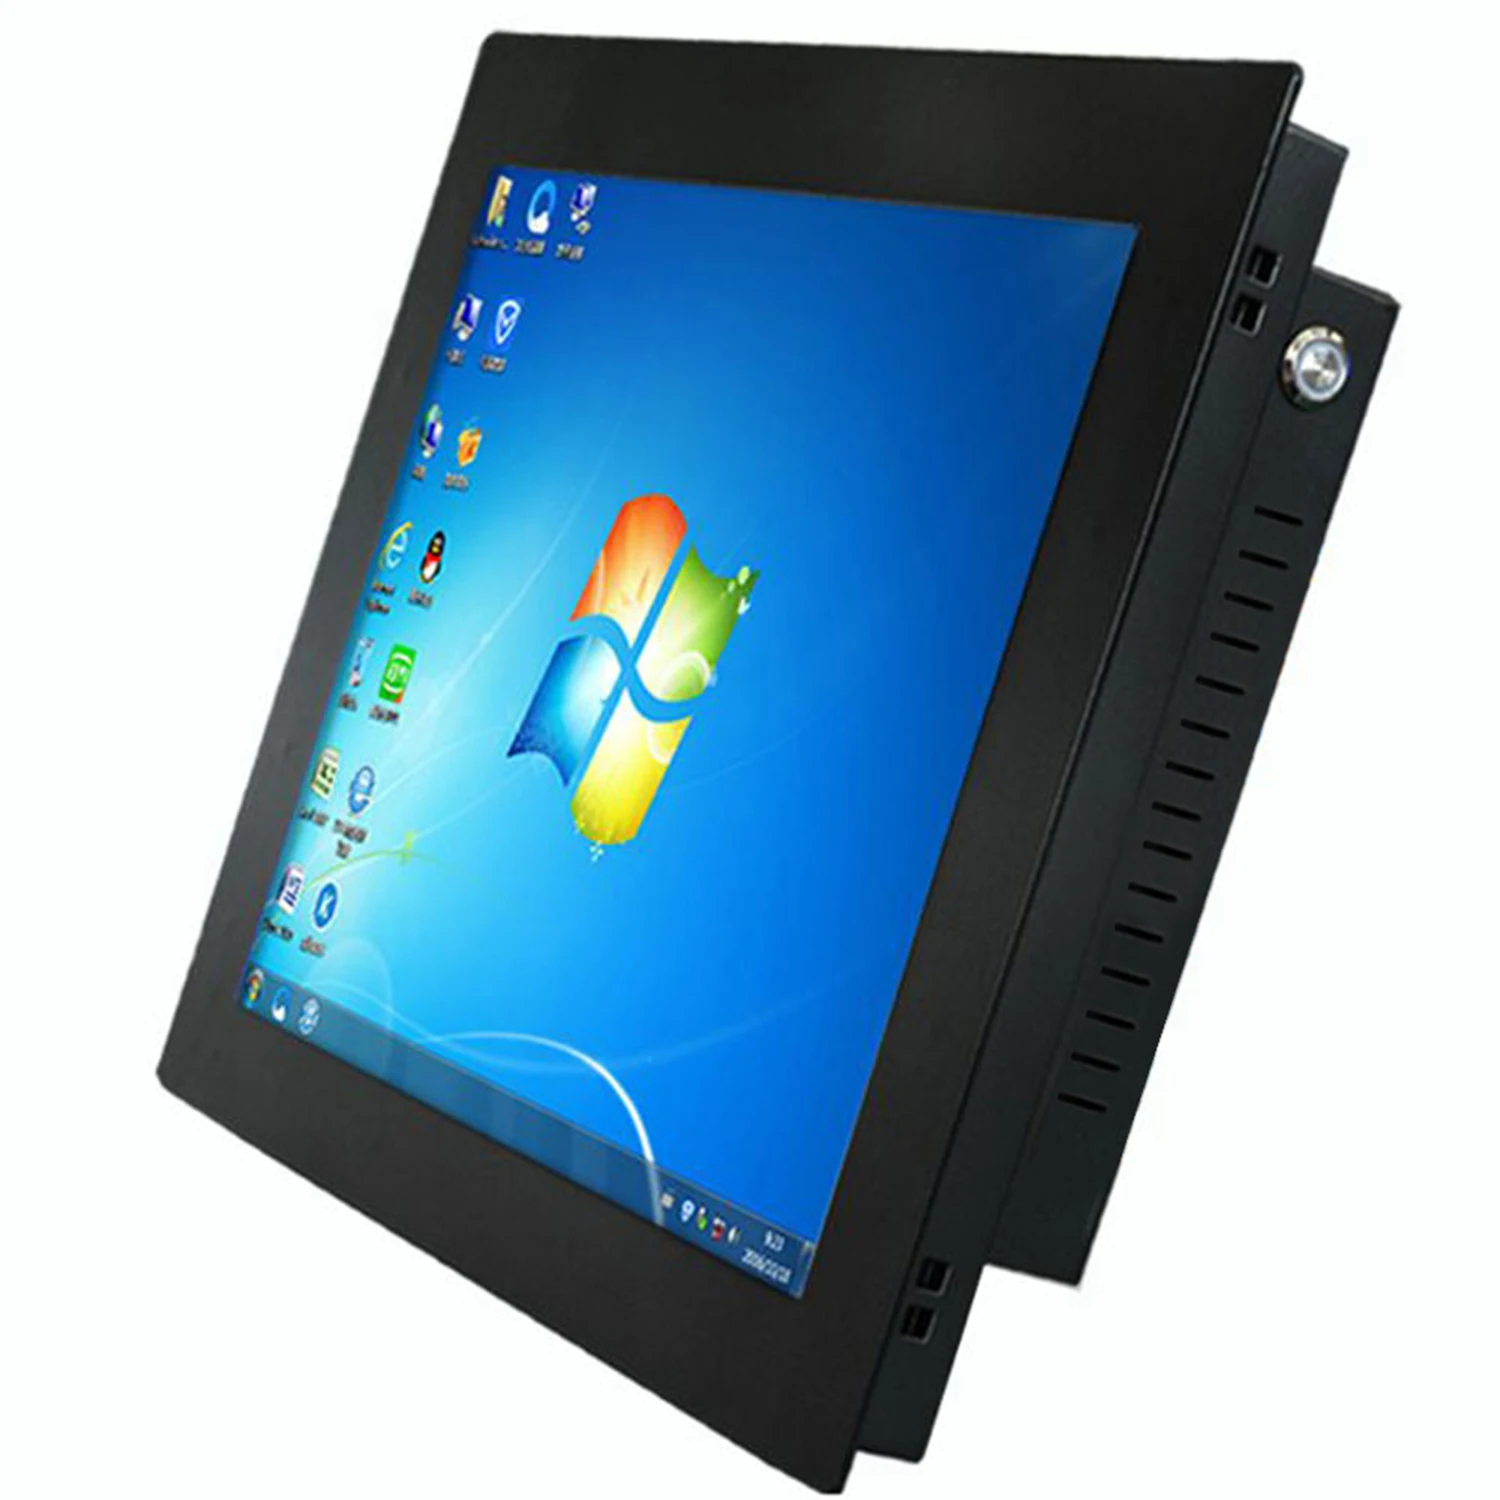 17 19 21.5 Inch buckle embedded mini tablet PC with resistive touch screen Celeron J1800 industrial all-in-one computer